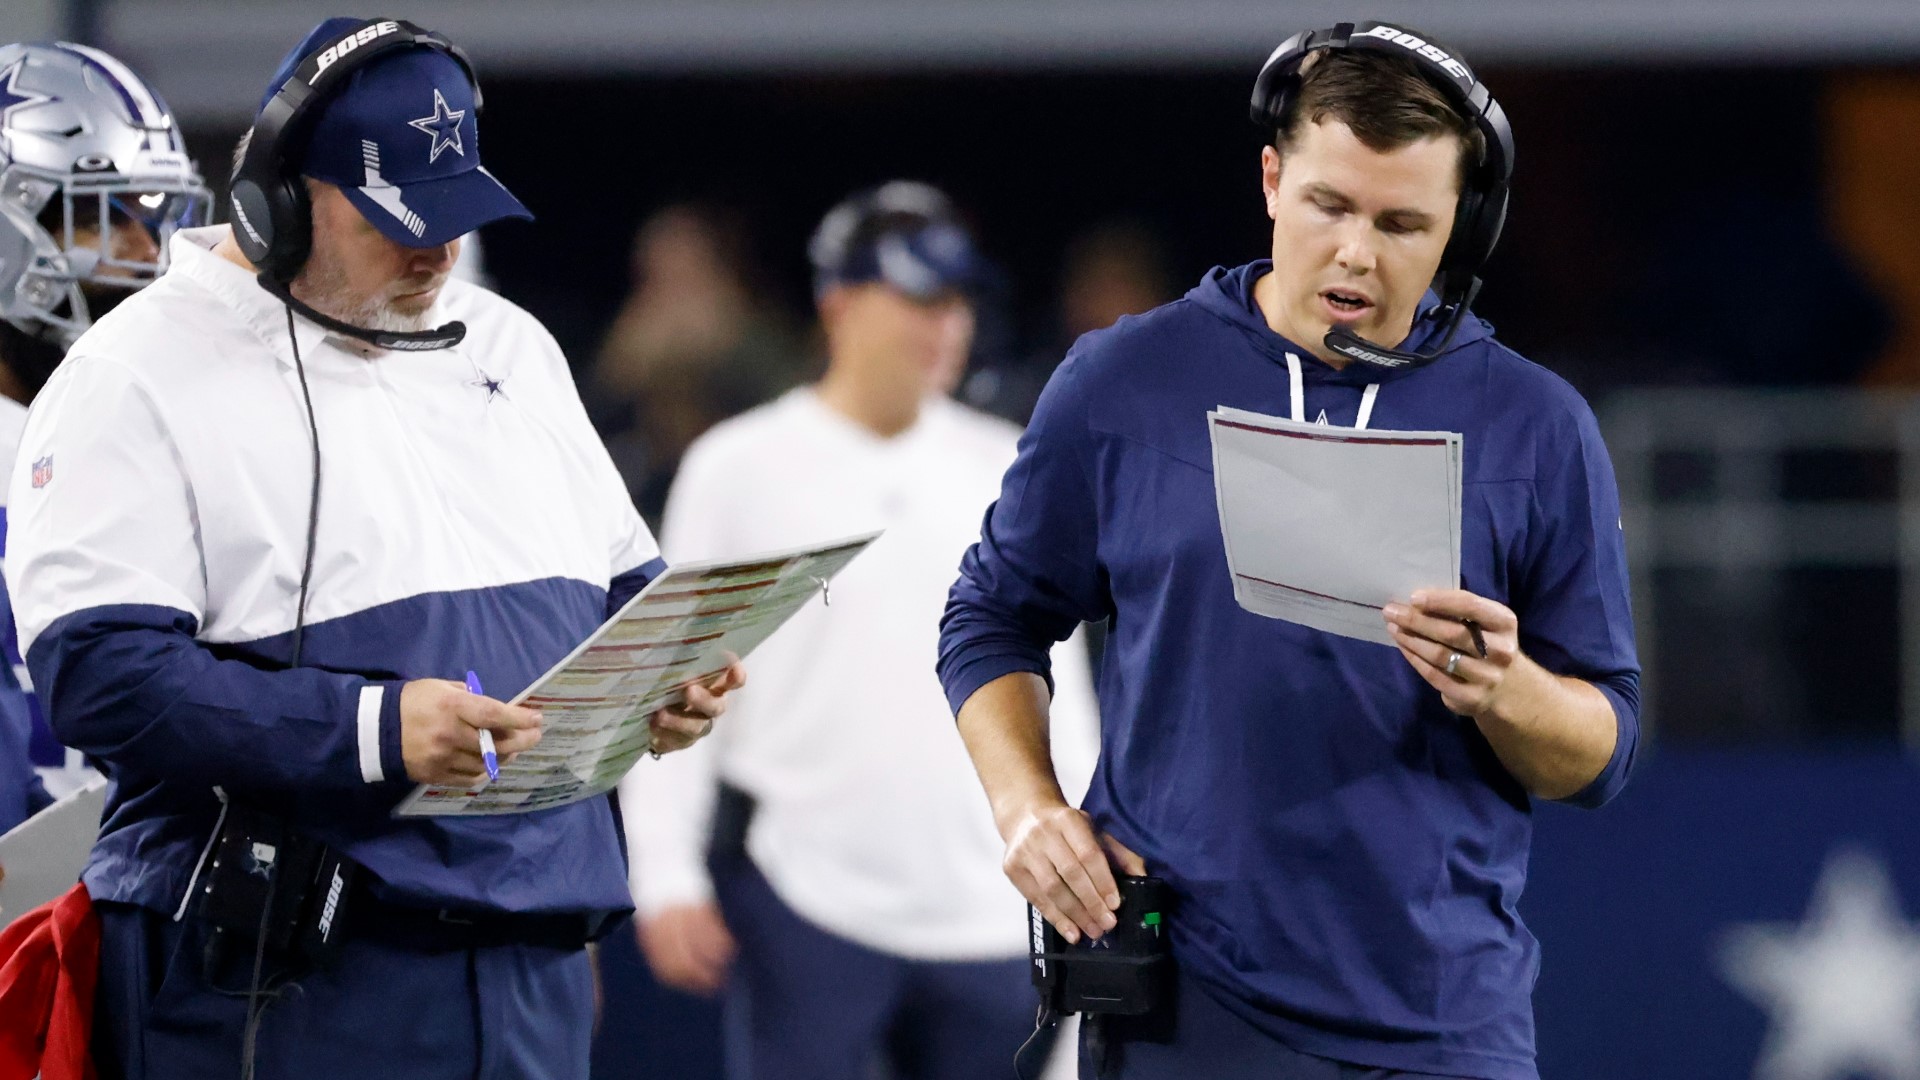 The Dallas Cowboys have parted ways with offensive coordinator Kellen Moore and quarterbacks coach Doug Nussmeier, the team announced.